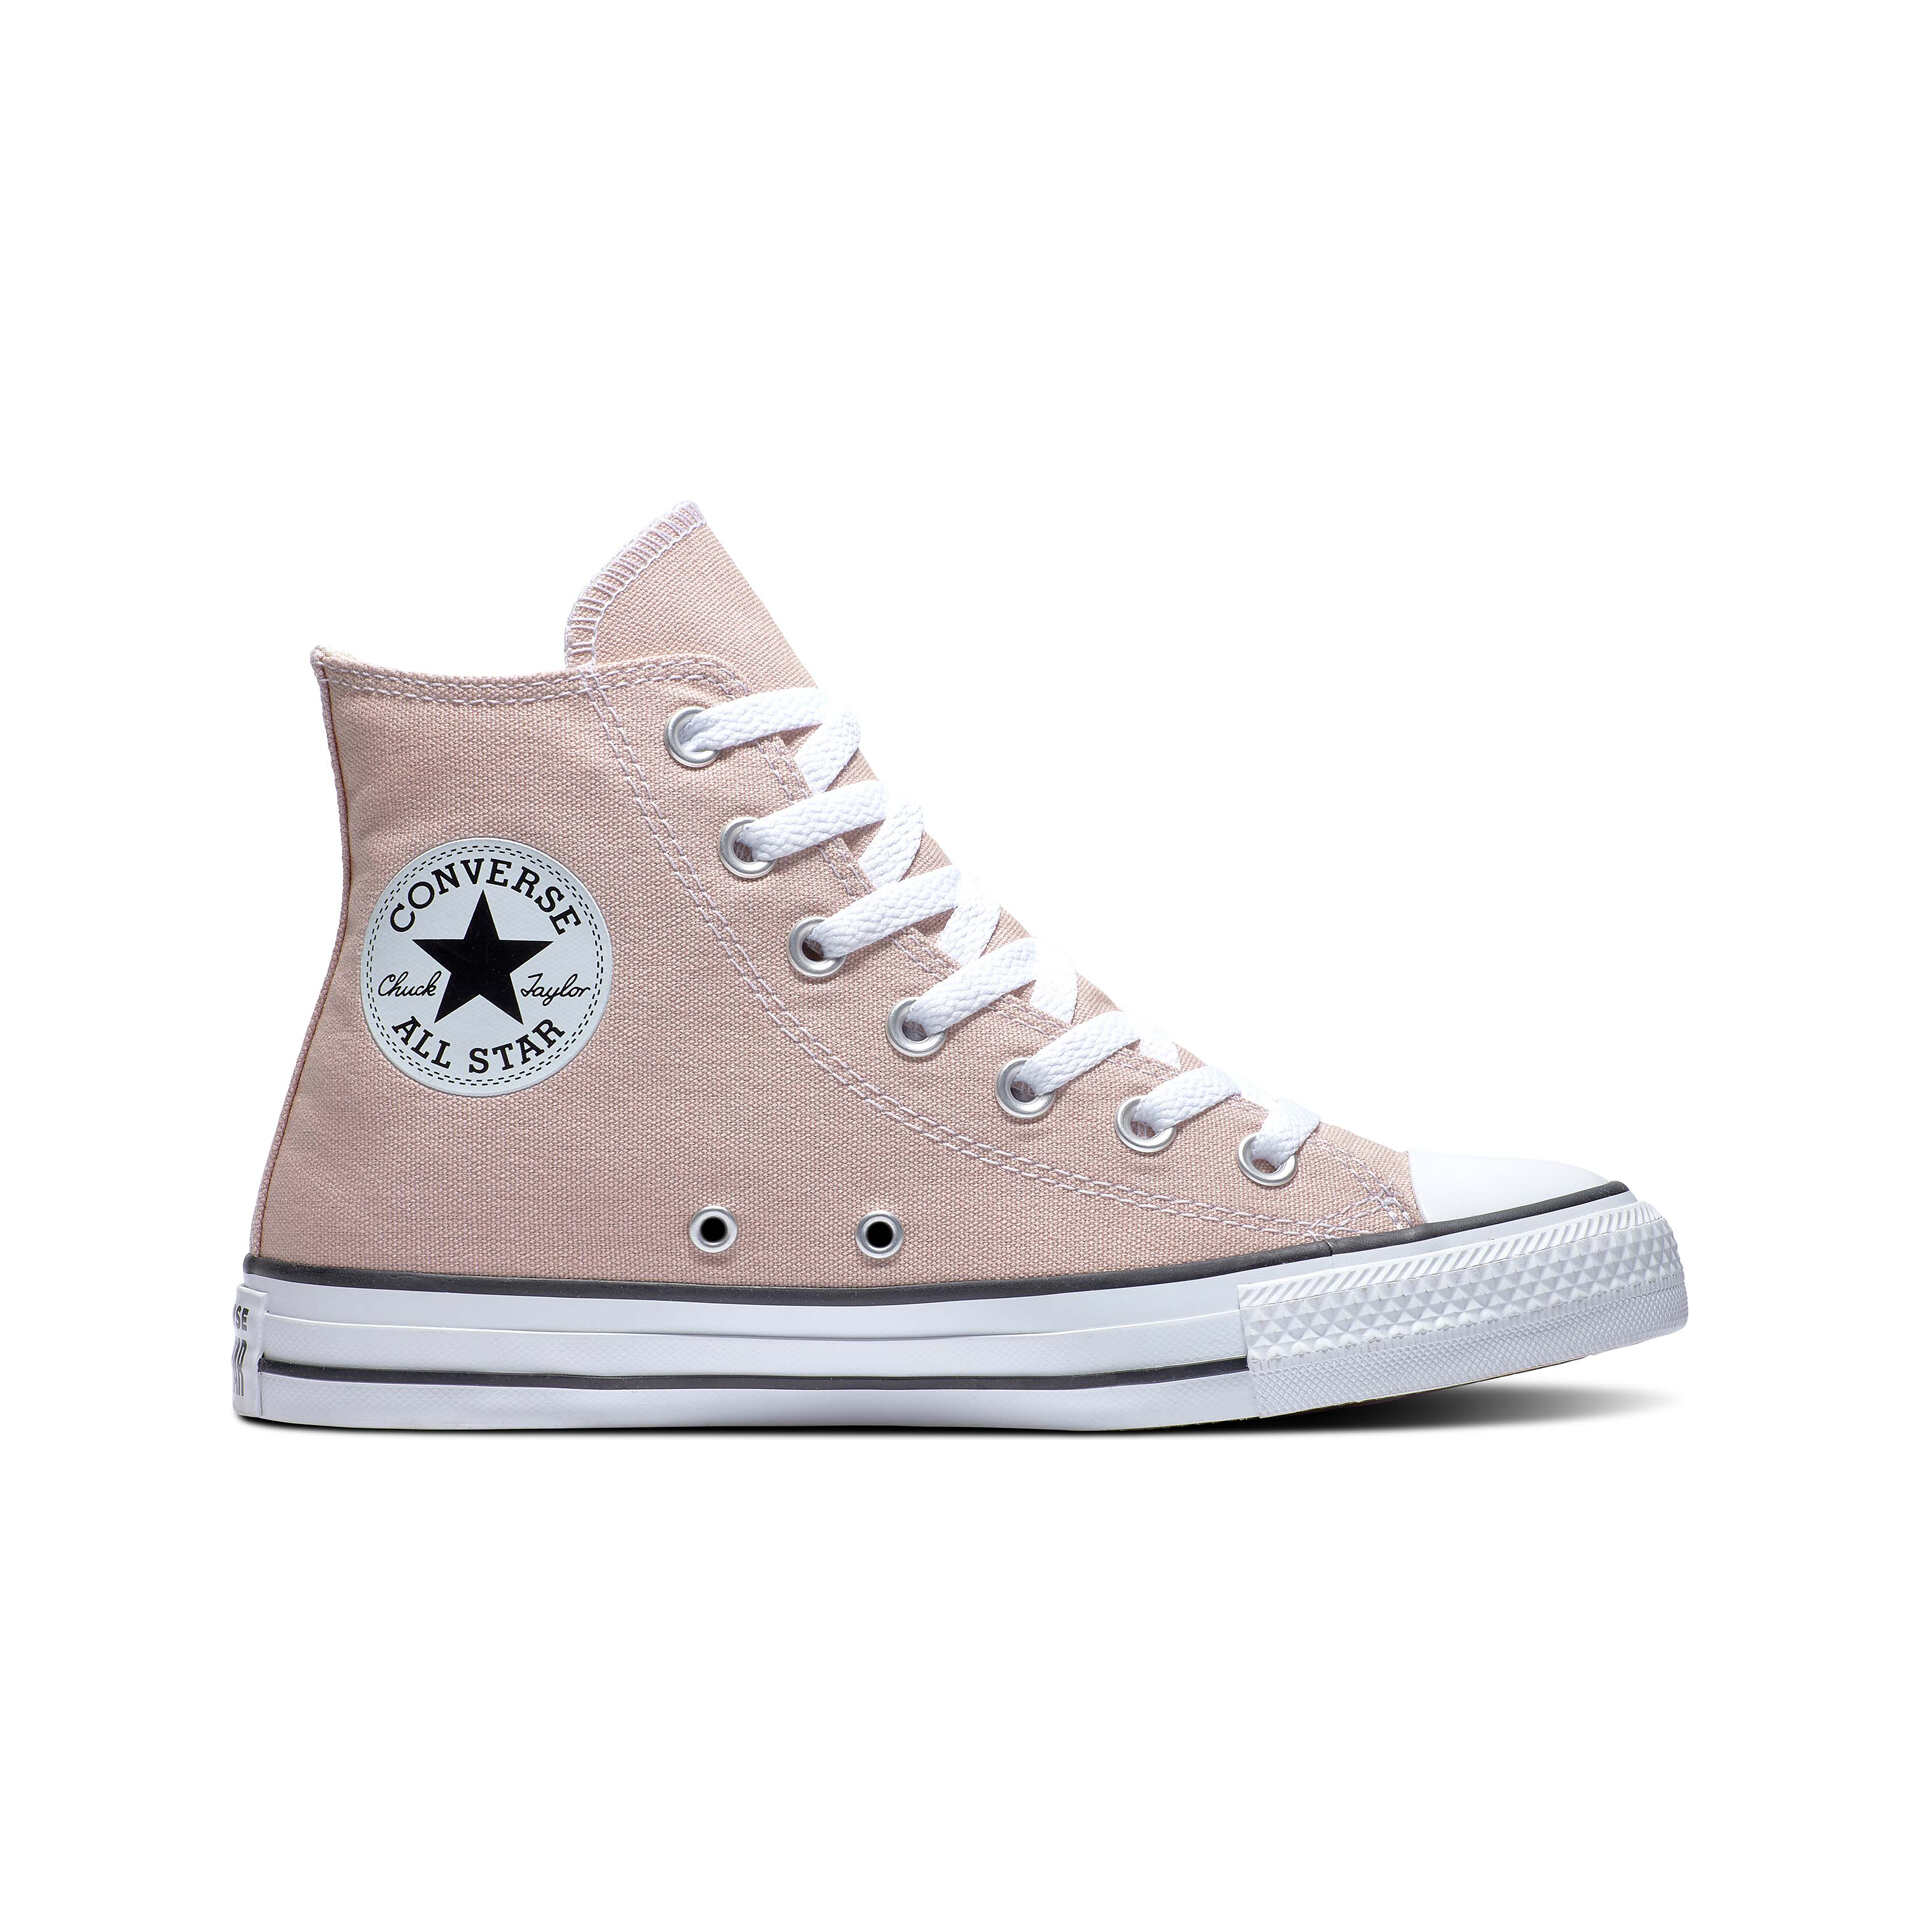 Converse Zapatillas Mujer CHUCK TAYLOR ALL STAR PARTIALLY RECYCLED COTTON lateral exterior